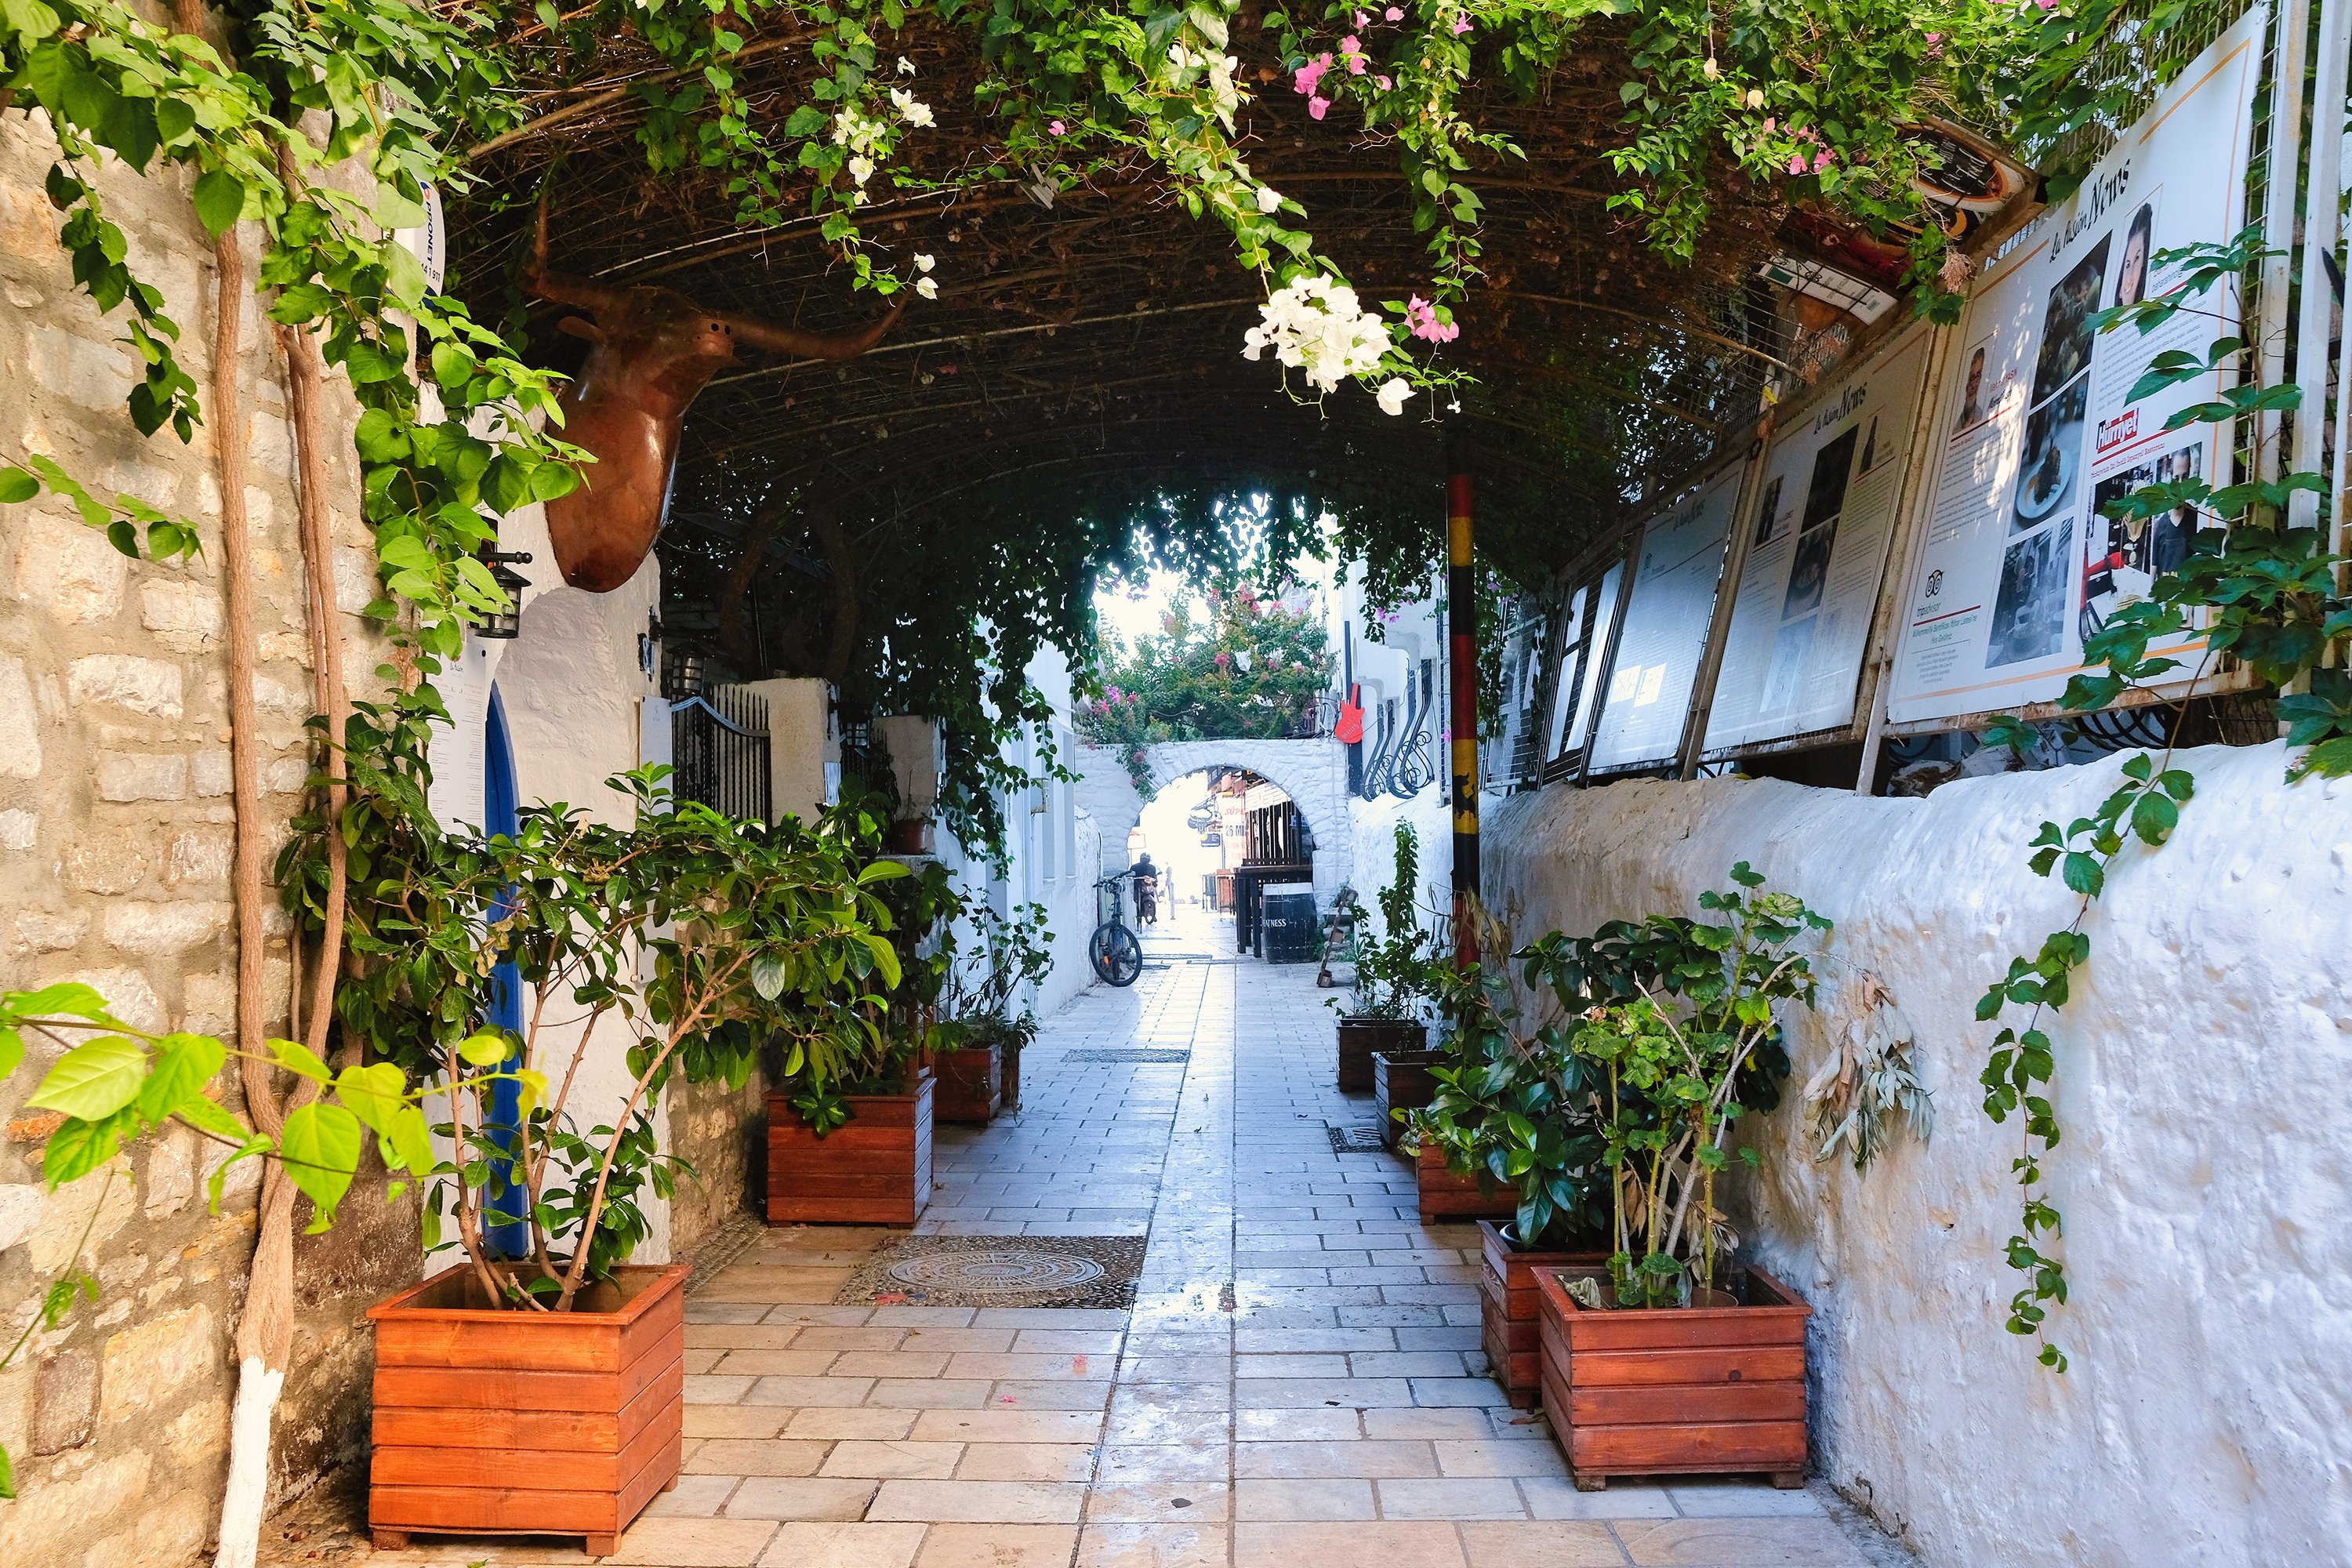 Wandering in the streets of Bodrum, lined with white houses, laidback bars, potted plants and vines of bougainvillea, is always free. (Shutterstock Photo)